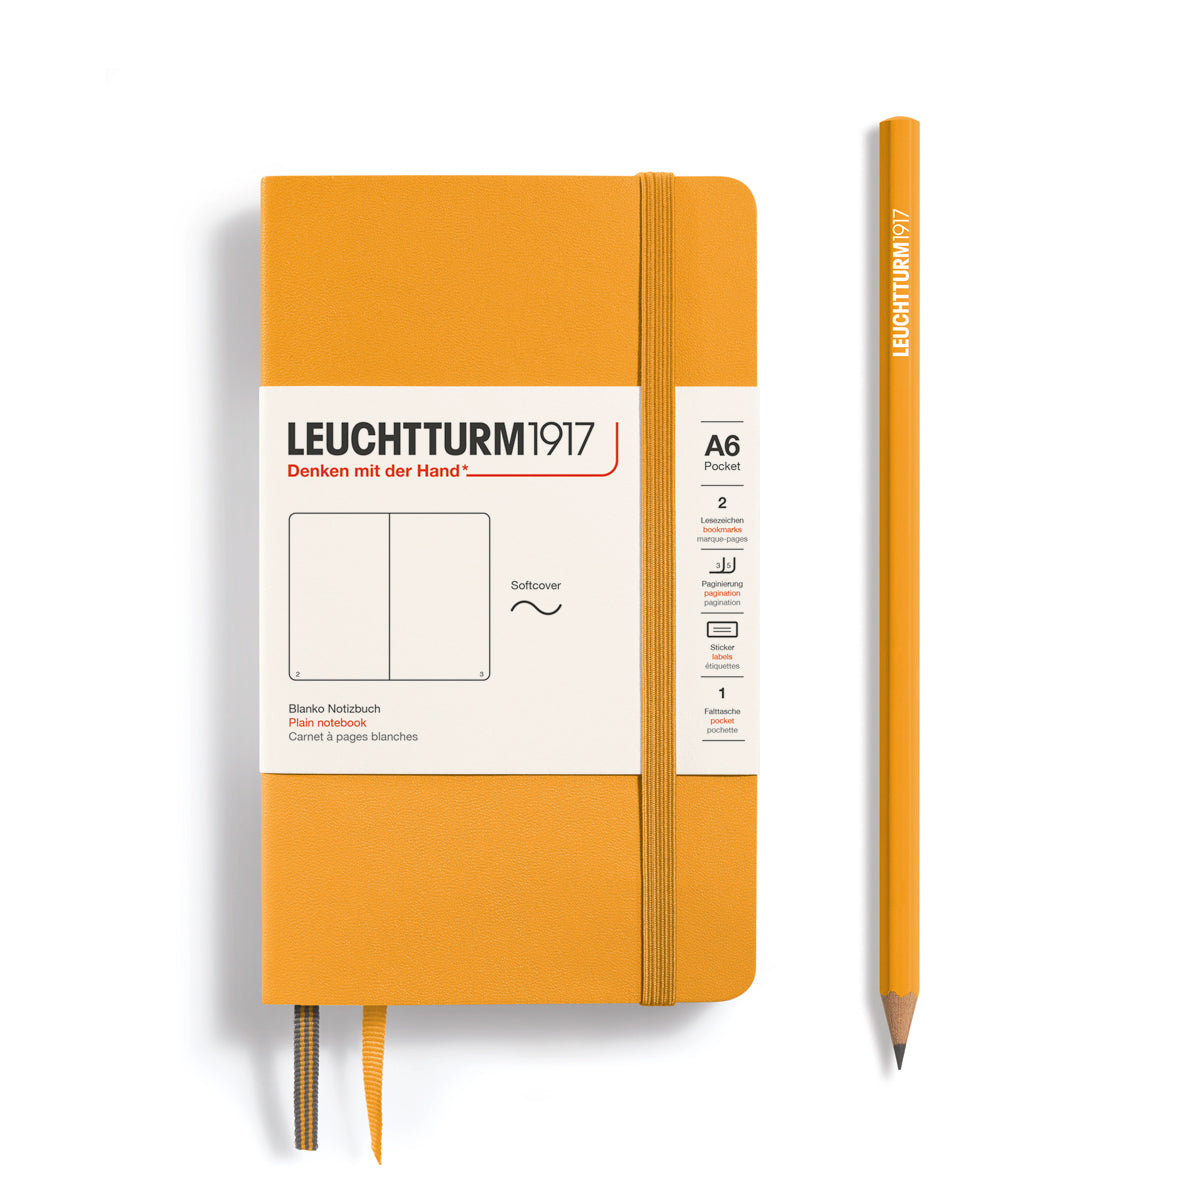 LEUCHTTURM1917 Notebook A6 Pocket Softcover in rising sun orange and blank inside at Penny Black